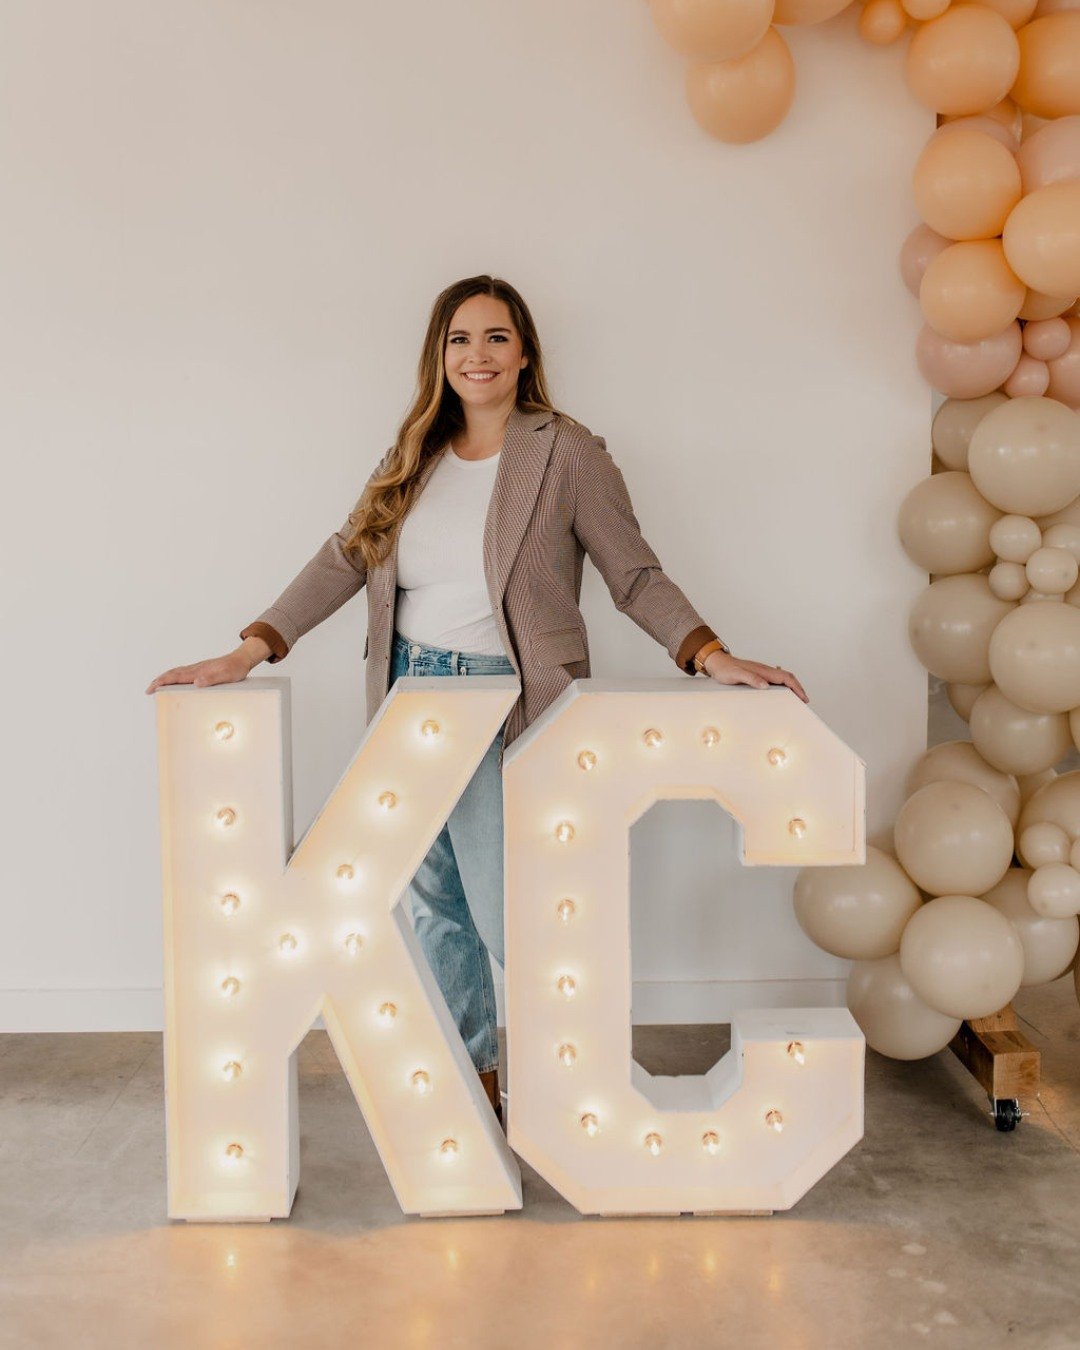 Kansas City, let's light up our local scene! 💡✨ From charming boutiques to cozy cafes, our city is bursting with small businesses that add that special sparkle to our lives. 💼🛍️ Let's support our community's dreamers and doers, one glowing marquee